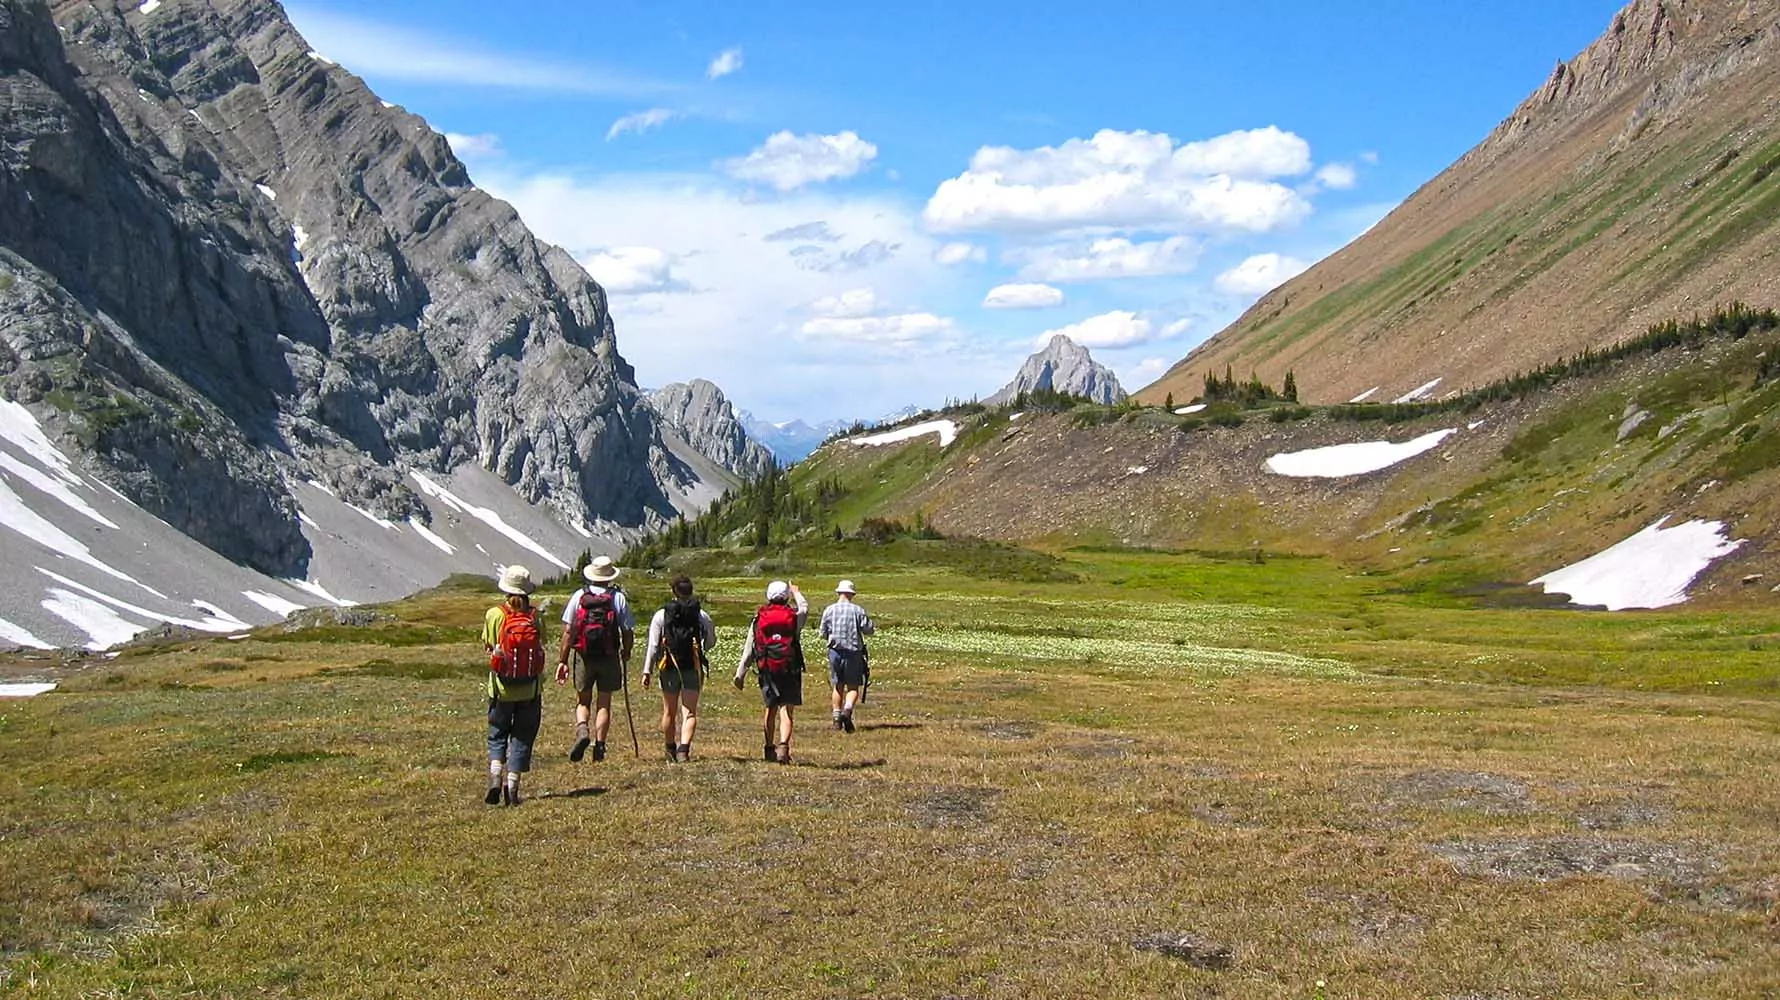 Backpacking Vacations This Summer